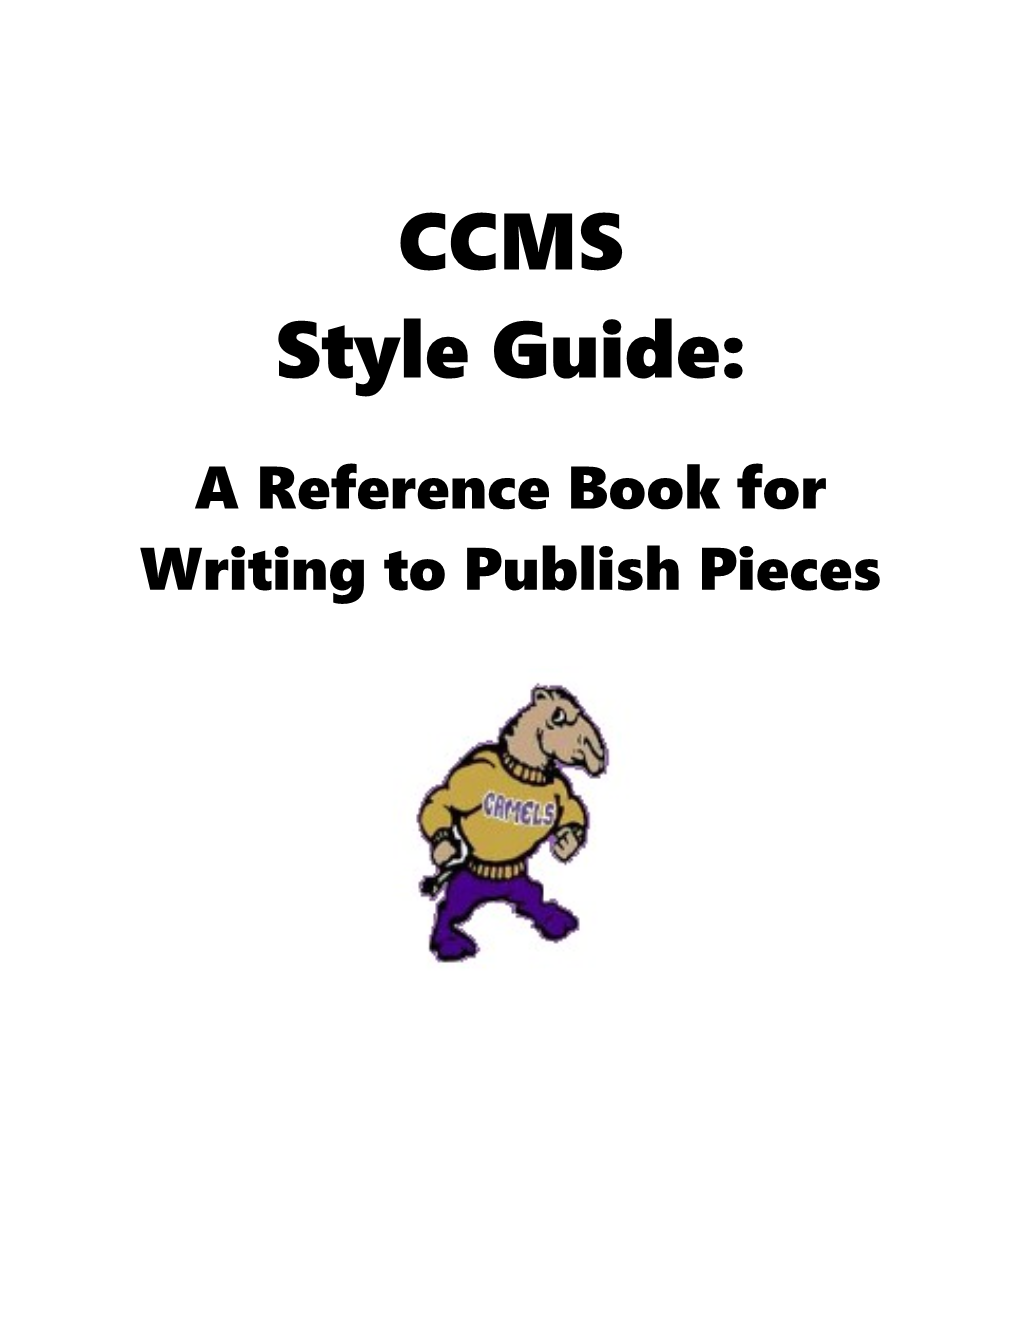 A Reference Book for Writing to Publish Pieces